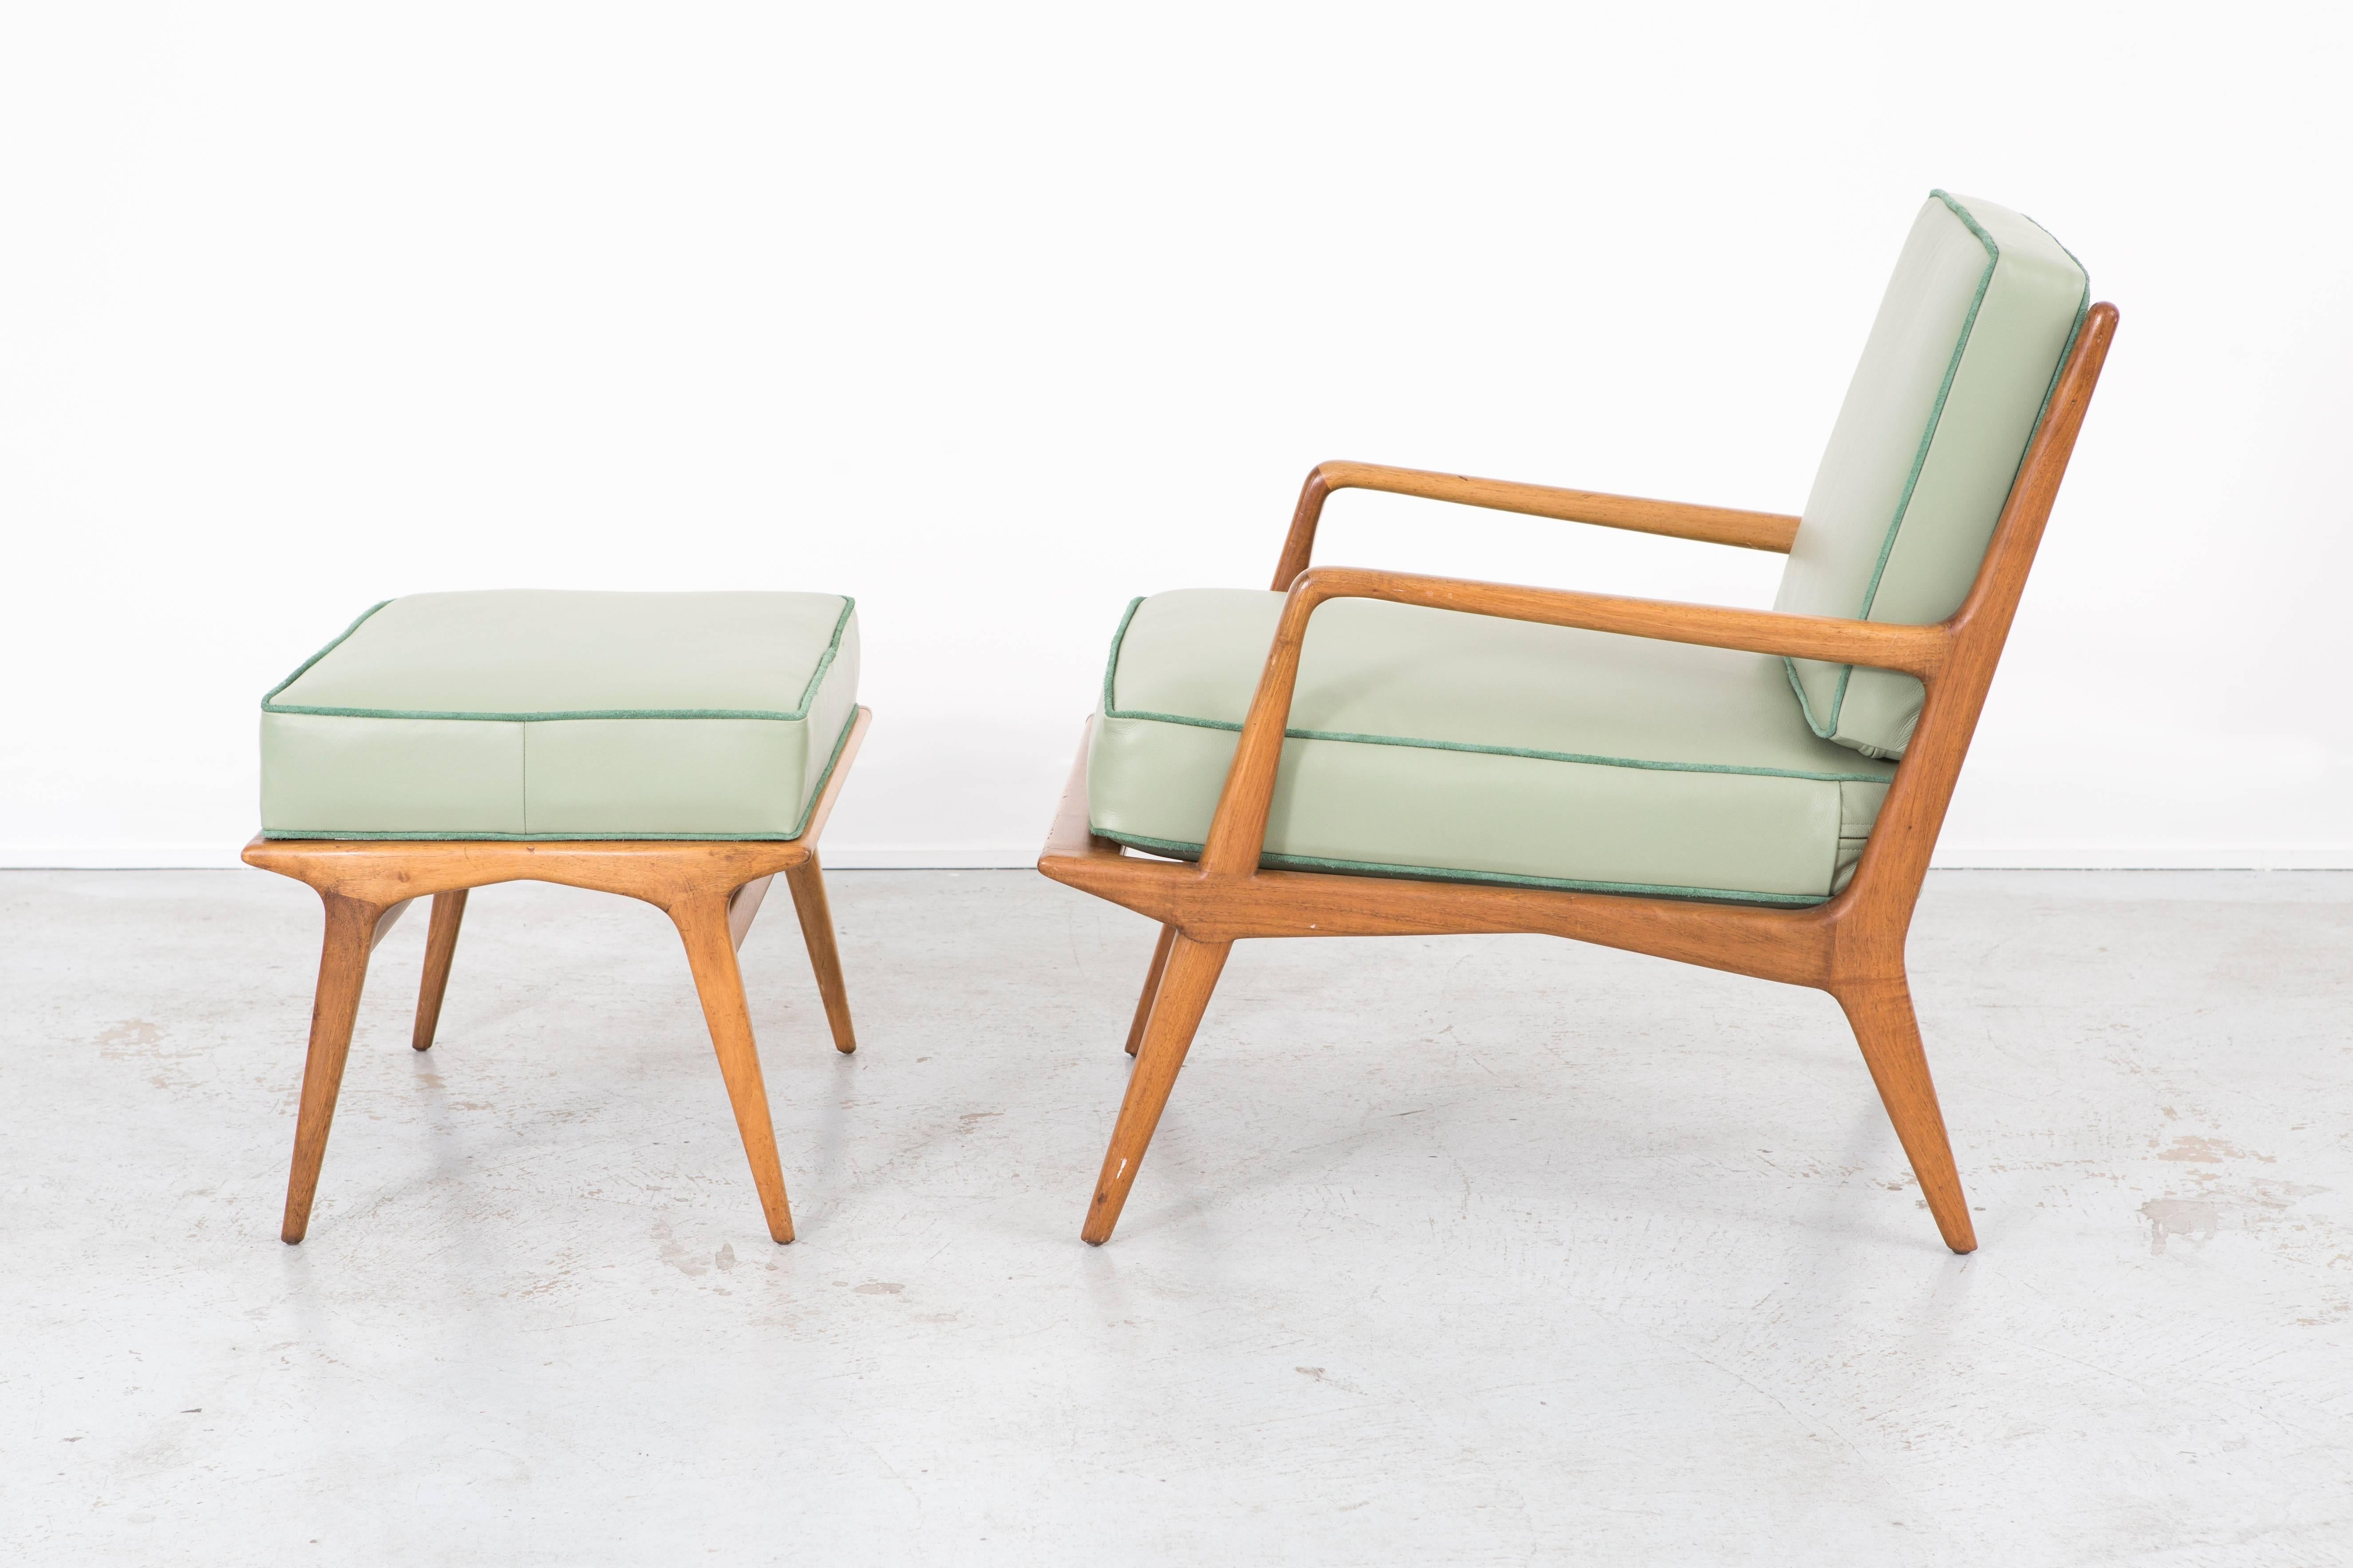 Lounge chair and ottoman

Designed by Carlo di Carli for M. Singer & Sons

USA, circa 1950s

Newly reupholstered monochromatic mint green grain leather and accent suede cording

Measures: Lounge chair 31 ½” H x 24” W x 30” D x seat 12” h

Ottoman